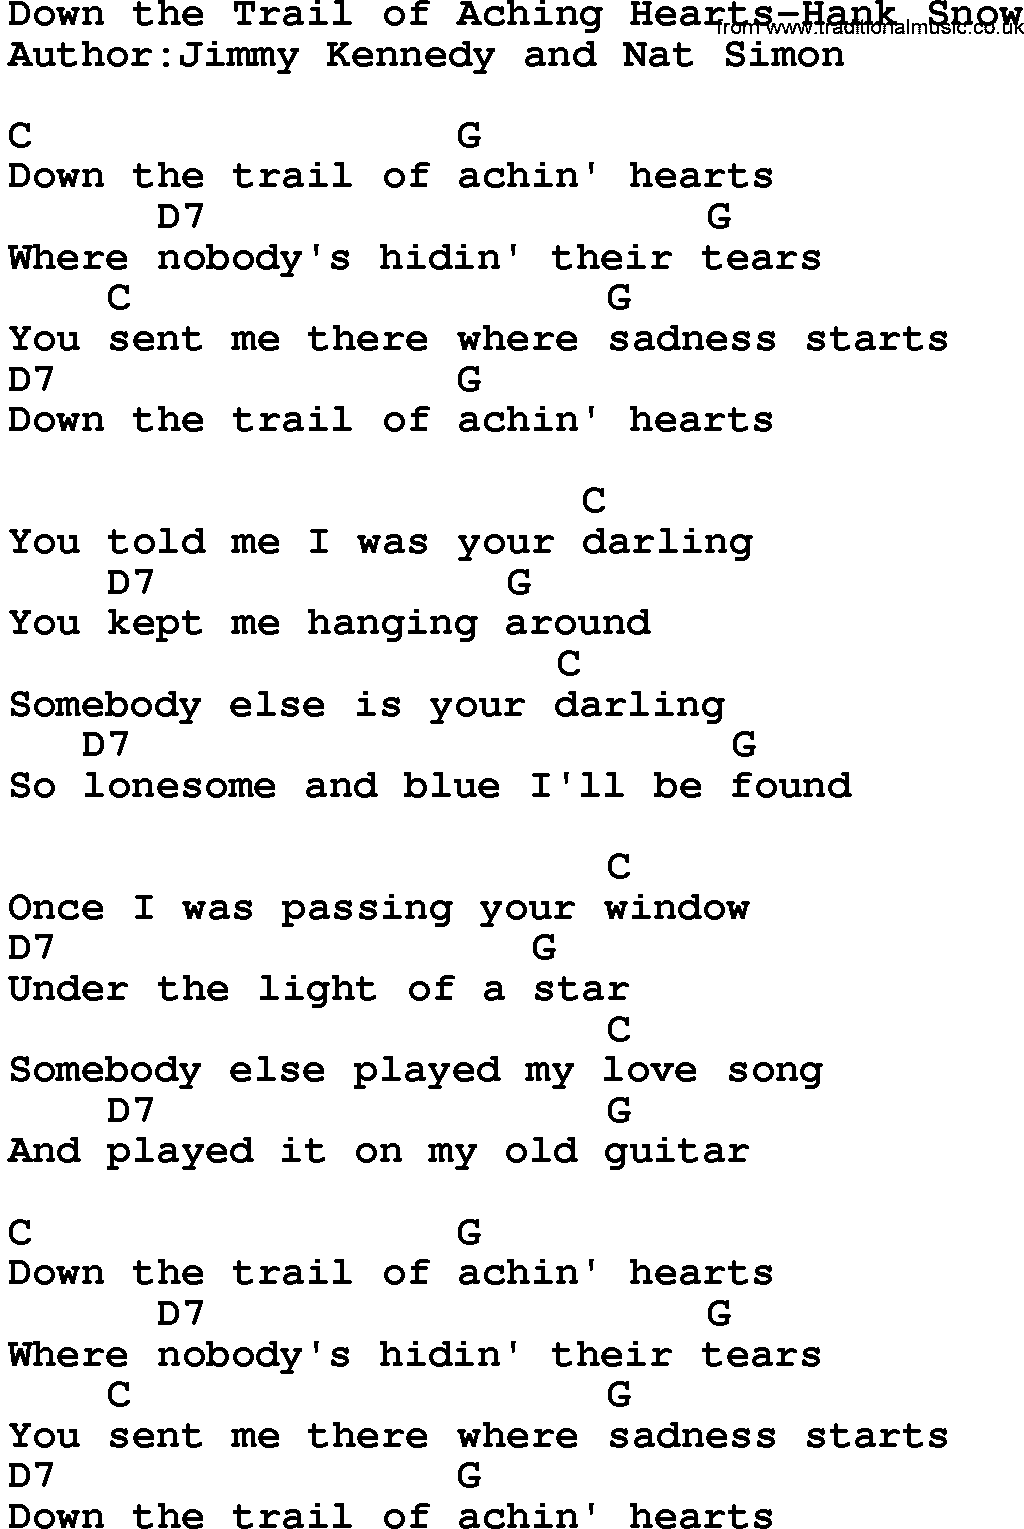 Country music song: Down The Trail Of Aching Hearts-Hank Snow  lyrics and chords